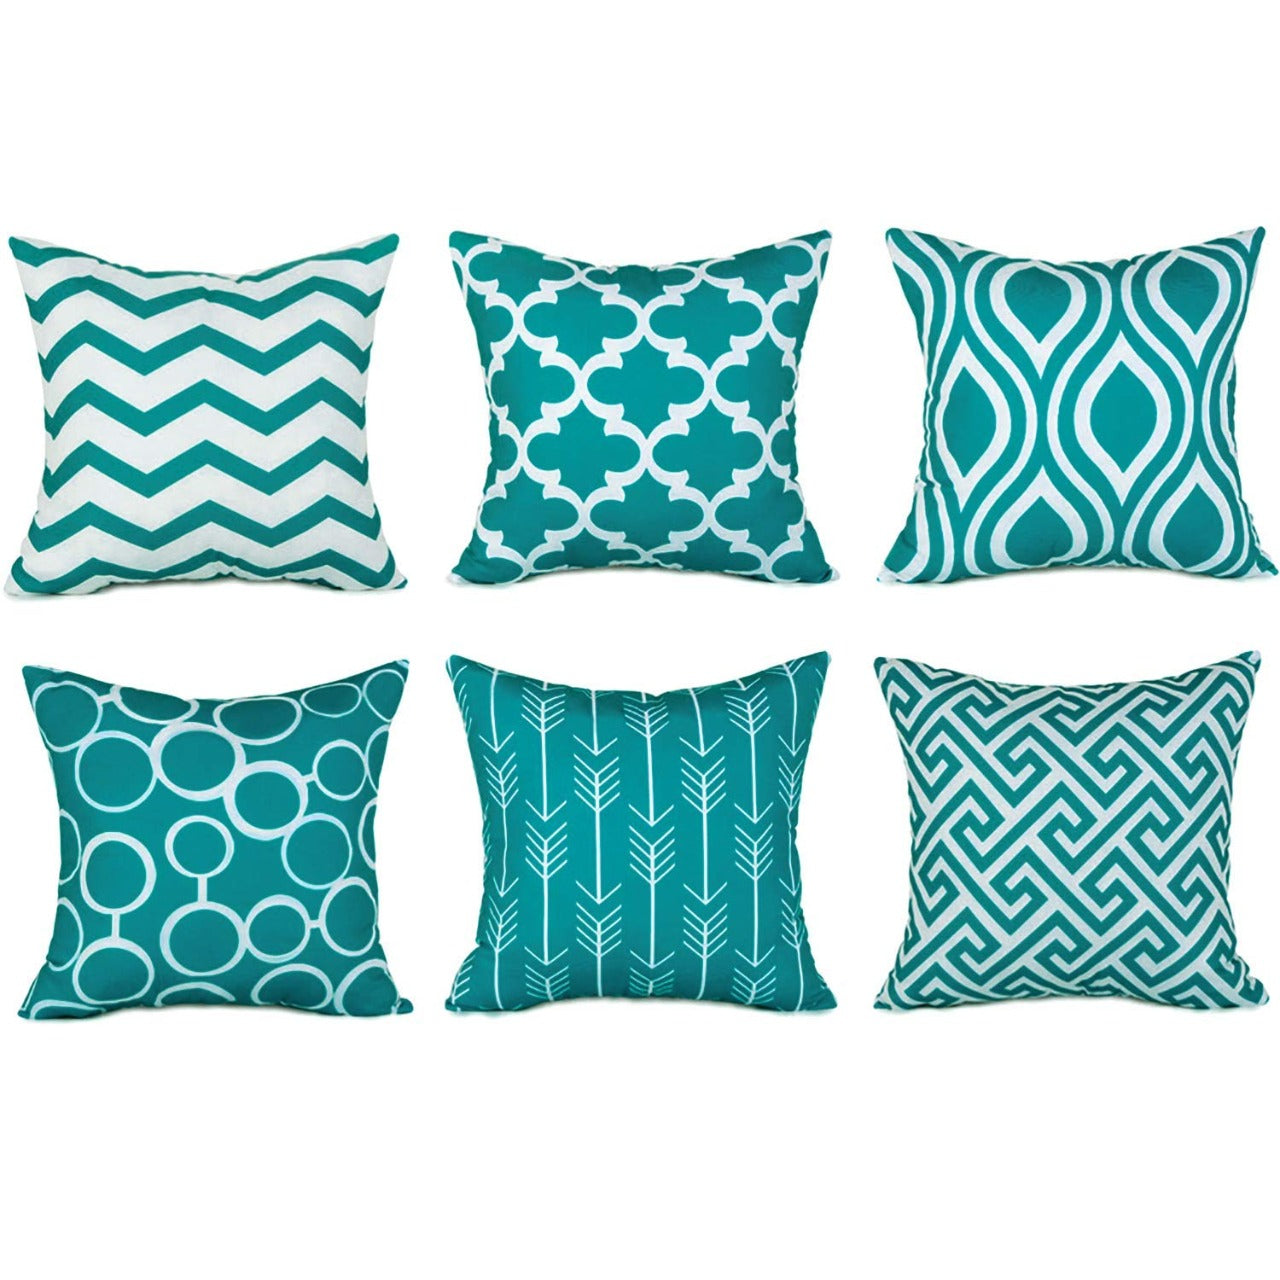 SWHF Soft Decorative Printed Velvet Cushion Cover Set of 6 (16 inch x 16 inch or 40 cm x 40 cm): Lime Green